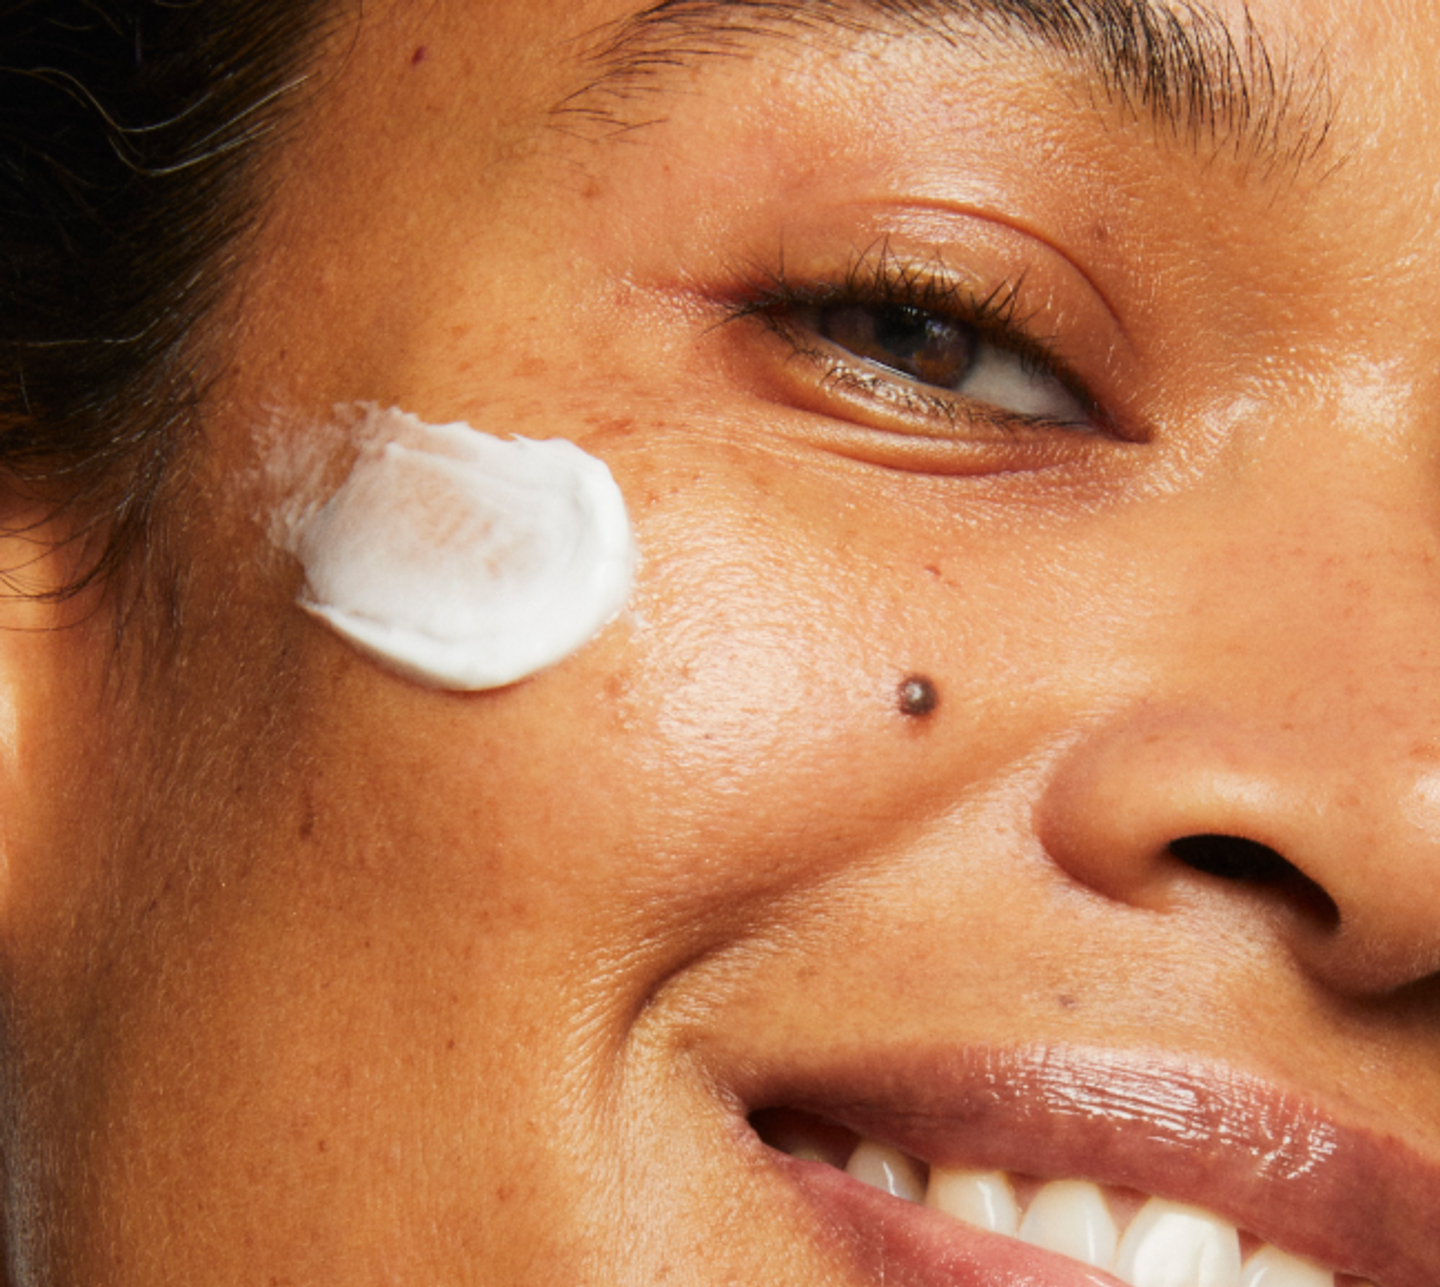 Close-up portrait of a model smiling. They are wearing a swipe of Milk Makeup Vegan Milk Moisturizer on their face.